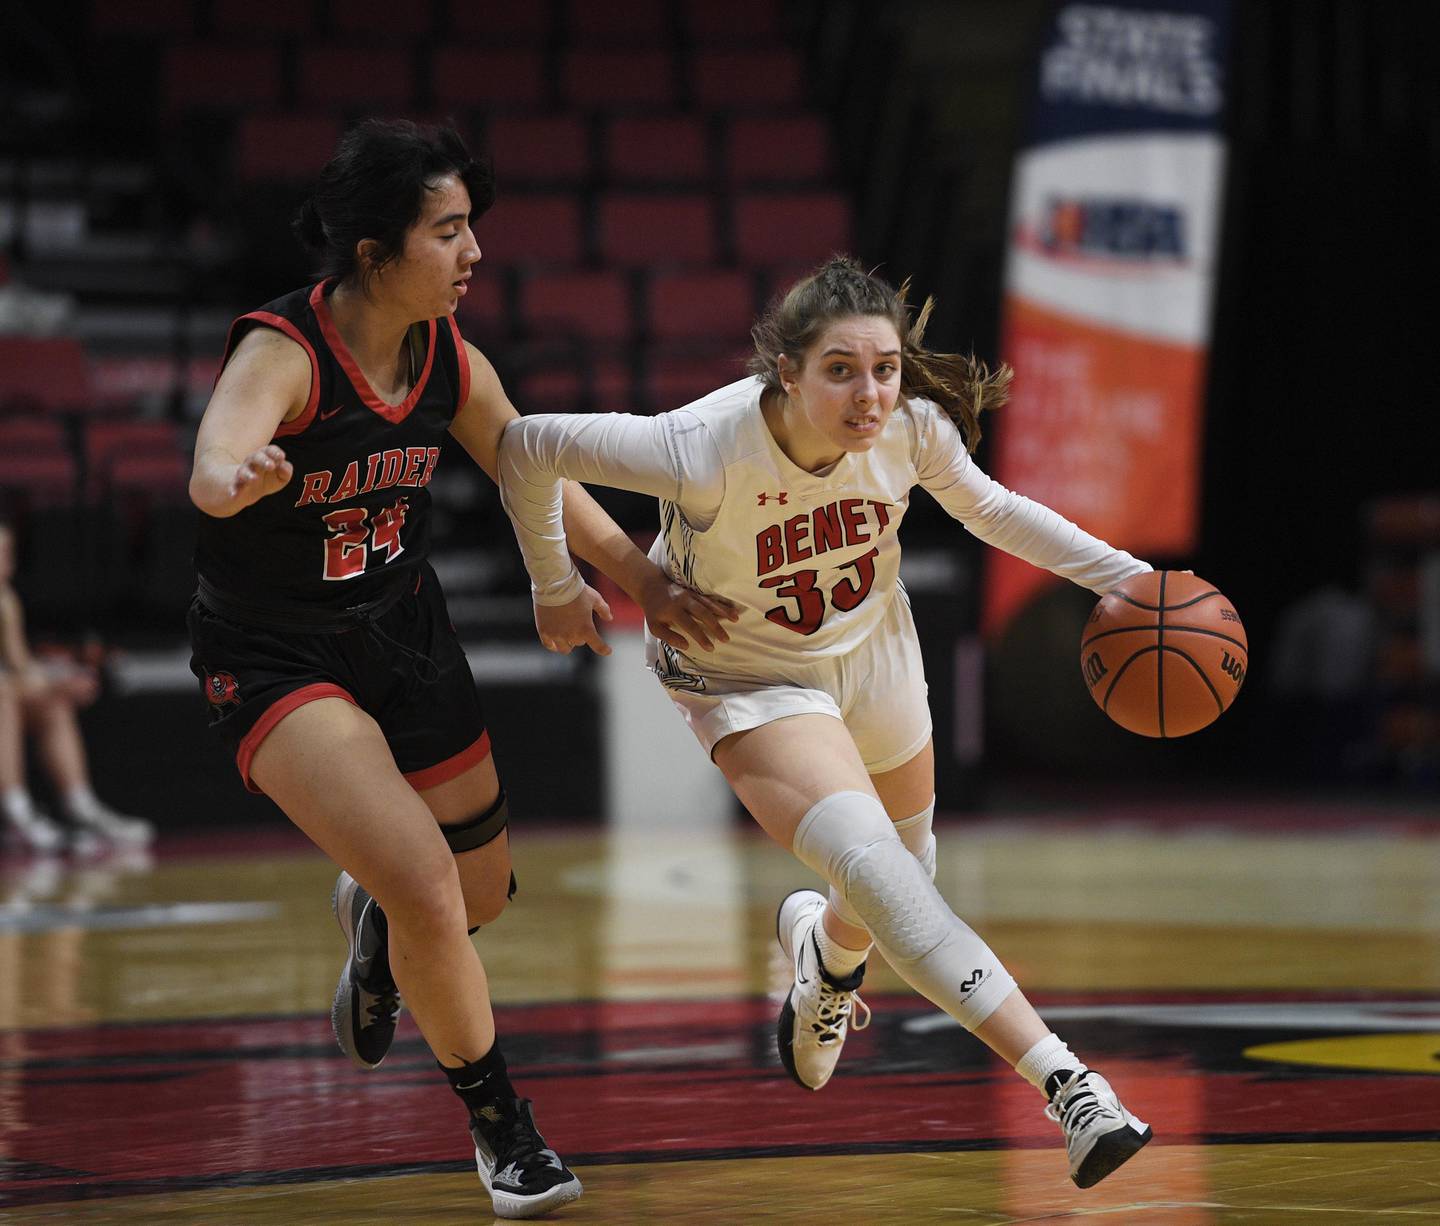 Benet Academy’s Maggie Sularski drives against Bolingbrook's Yahaira Bueno in the Class 4A state 3rd place game at Redbird Arena at Illinois State University in Normal on Friday, March 4, 2022.